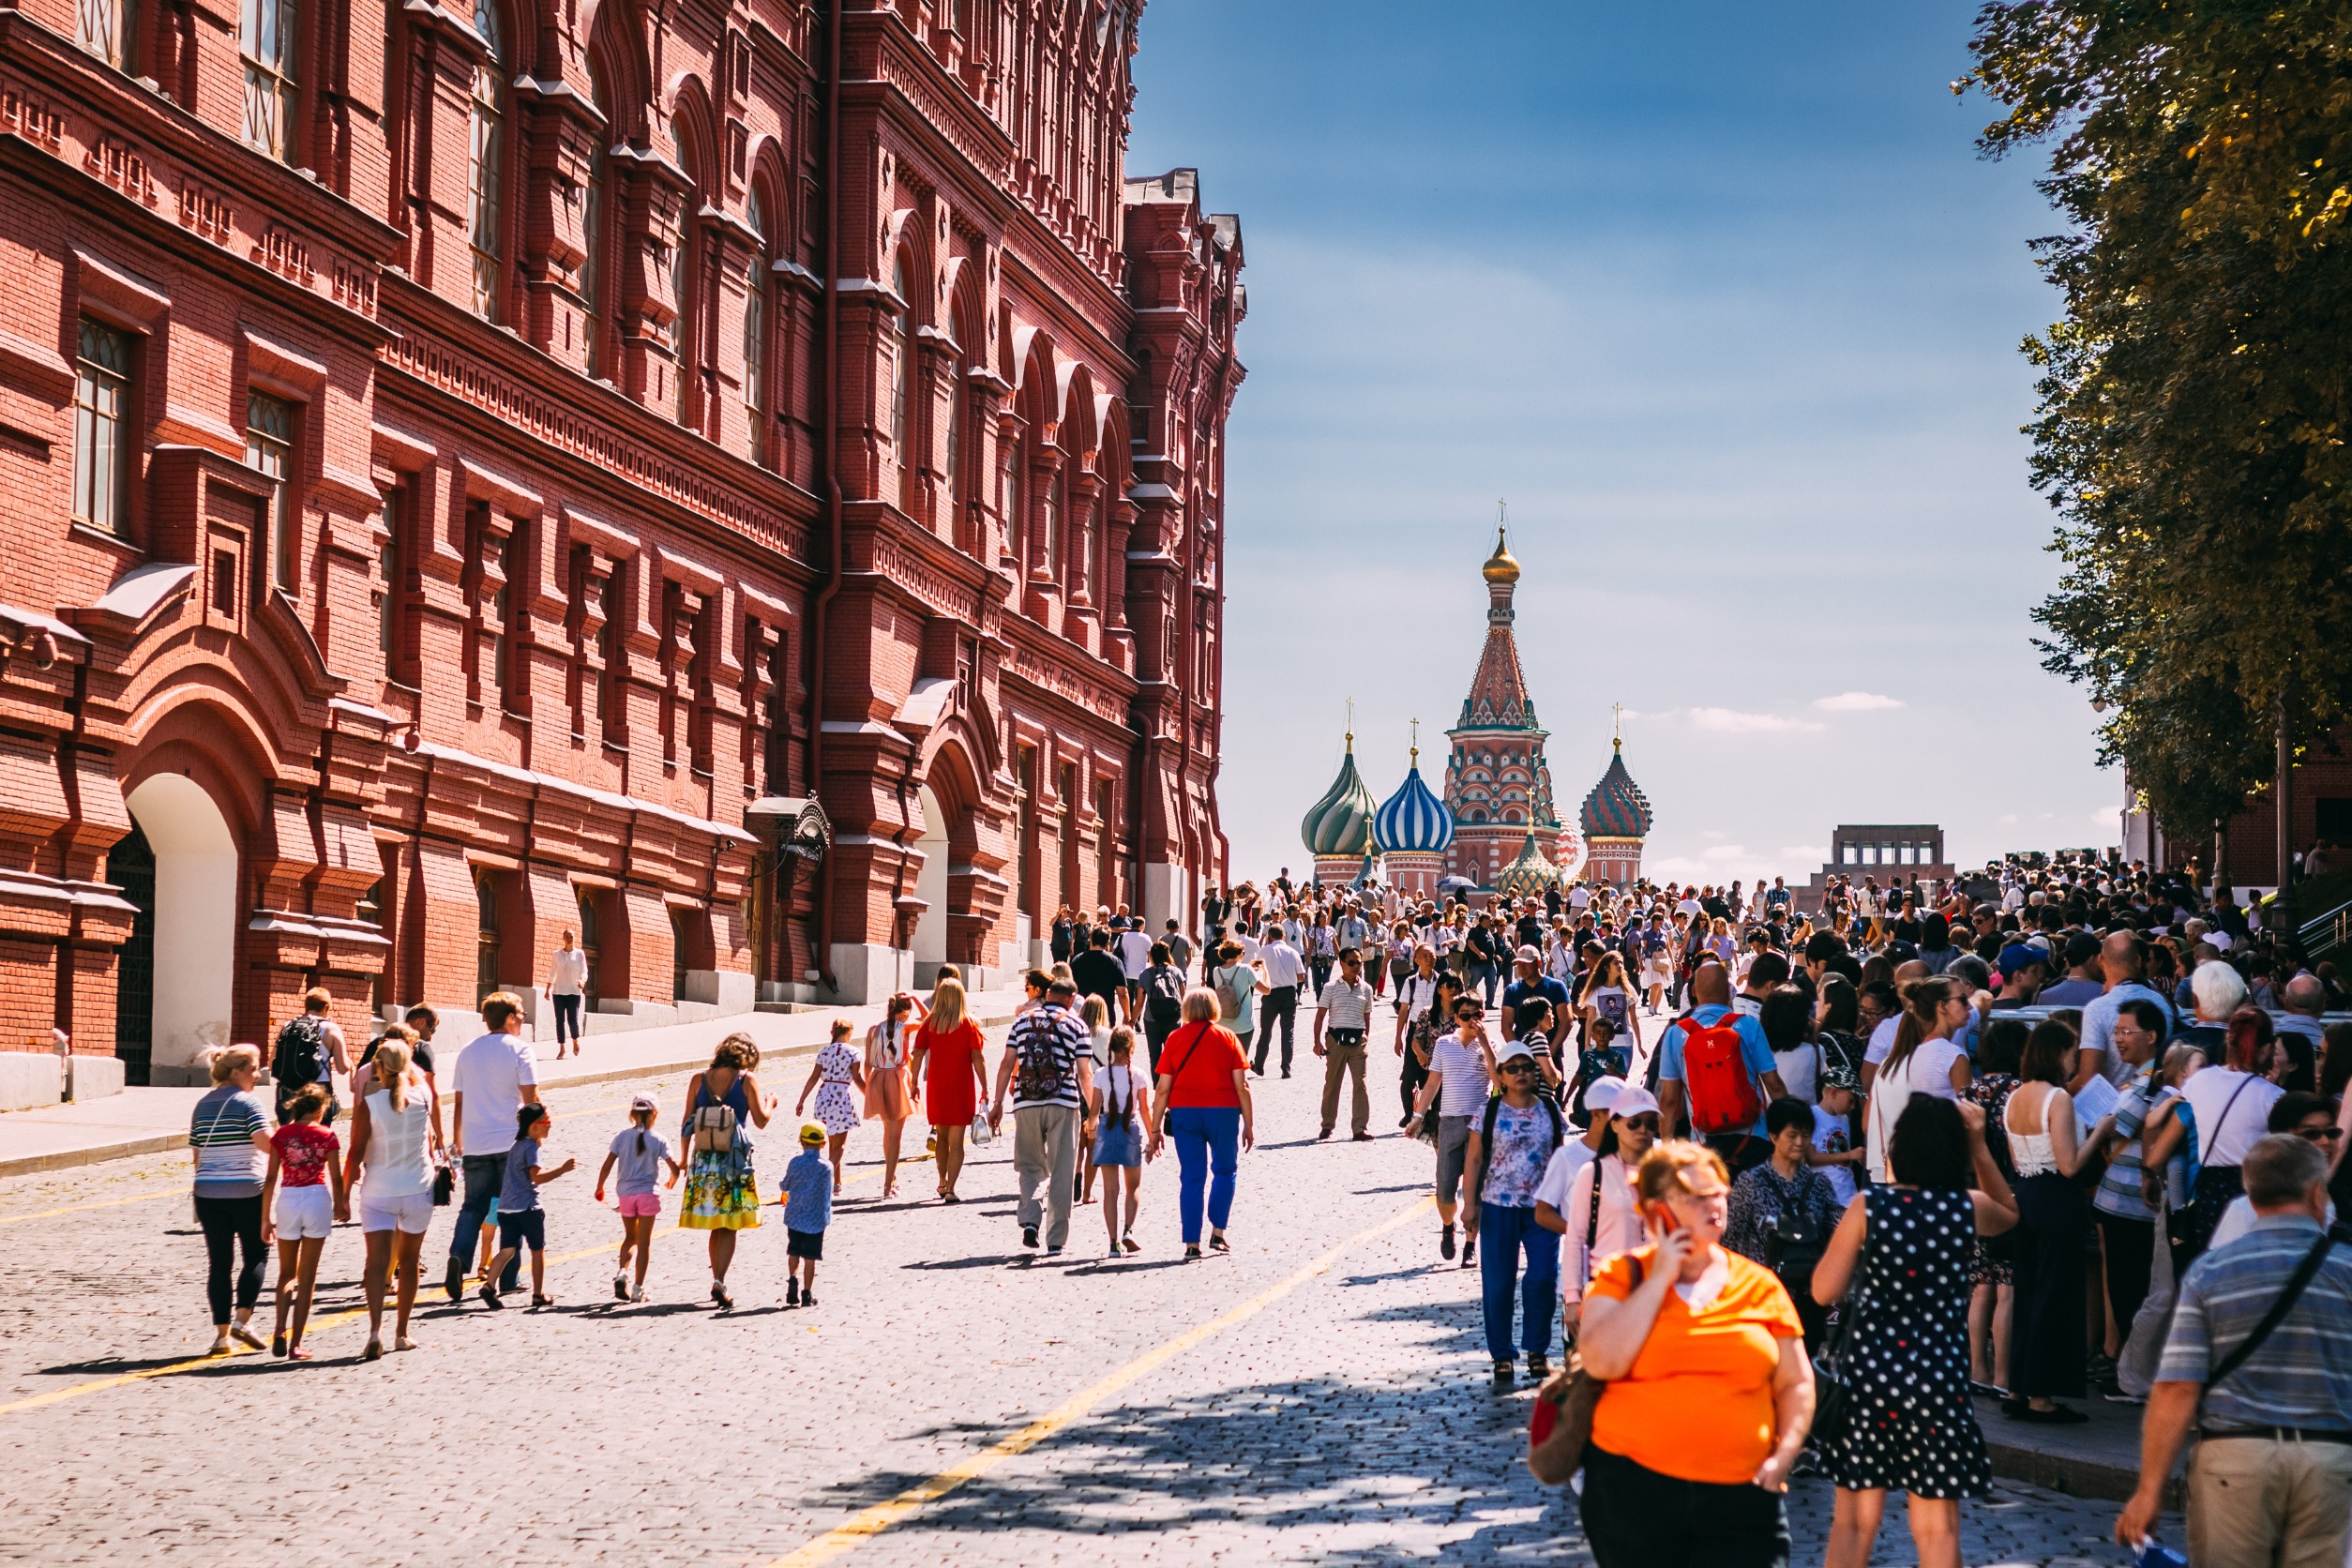 Surge in Tourism to Russia Highlighted by Rise in Visa Applications